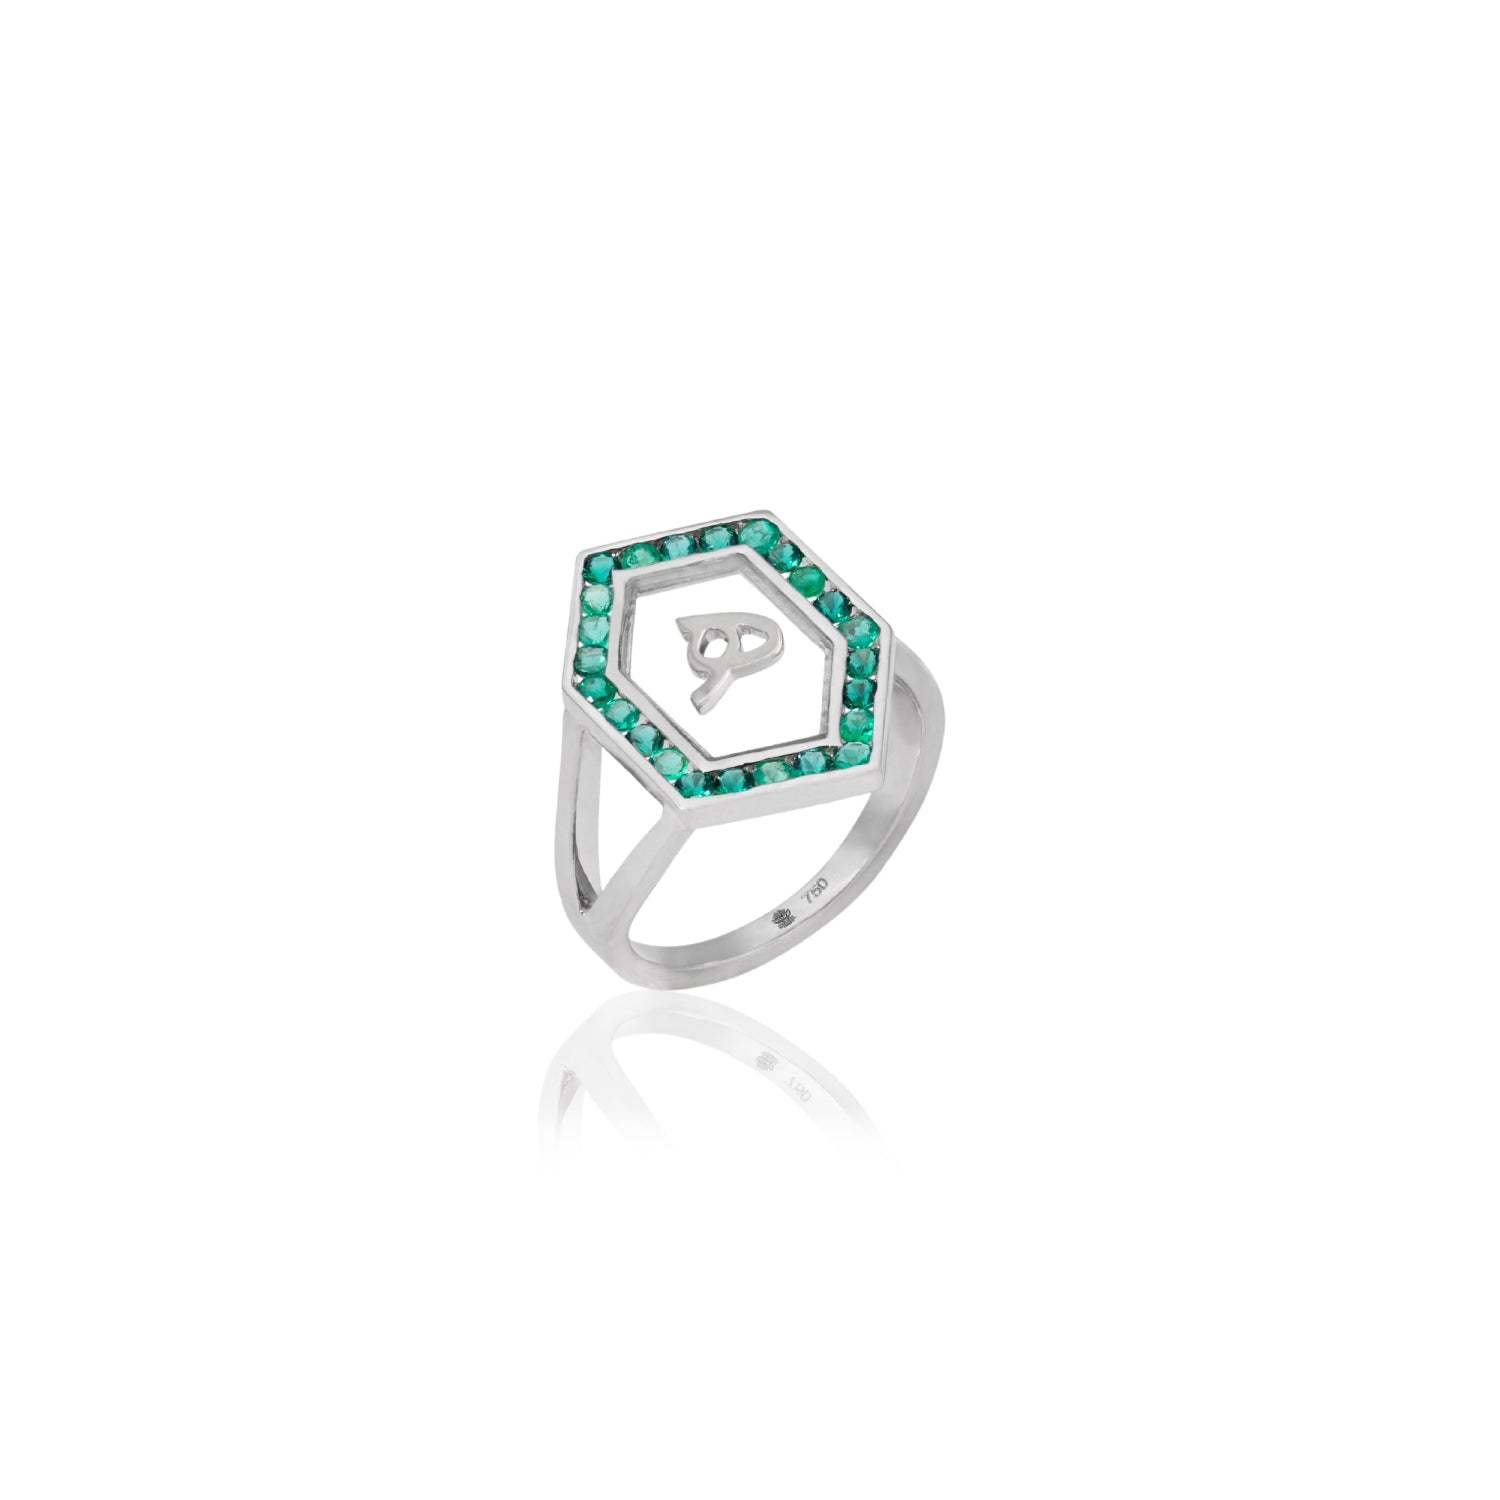 Qamoos 1.0 Letter هـ Emerald Ring in White Gold